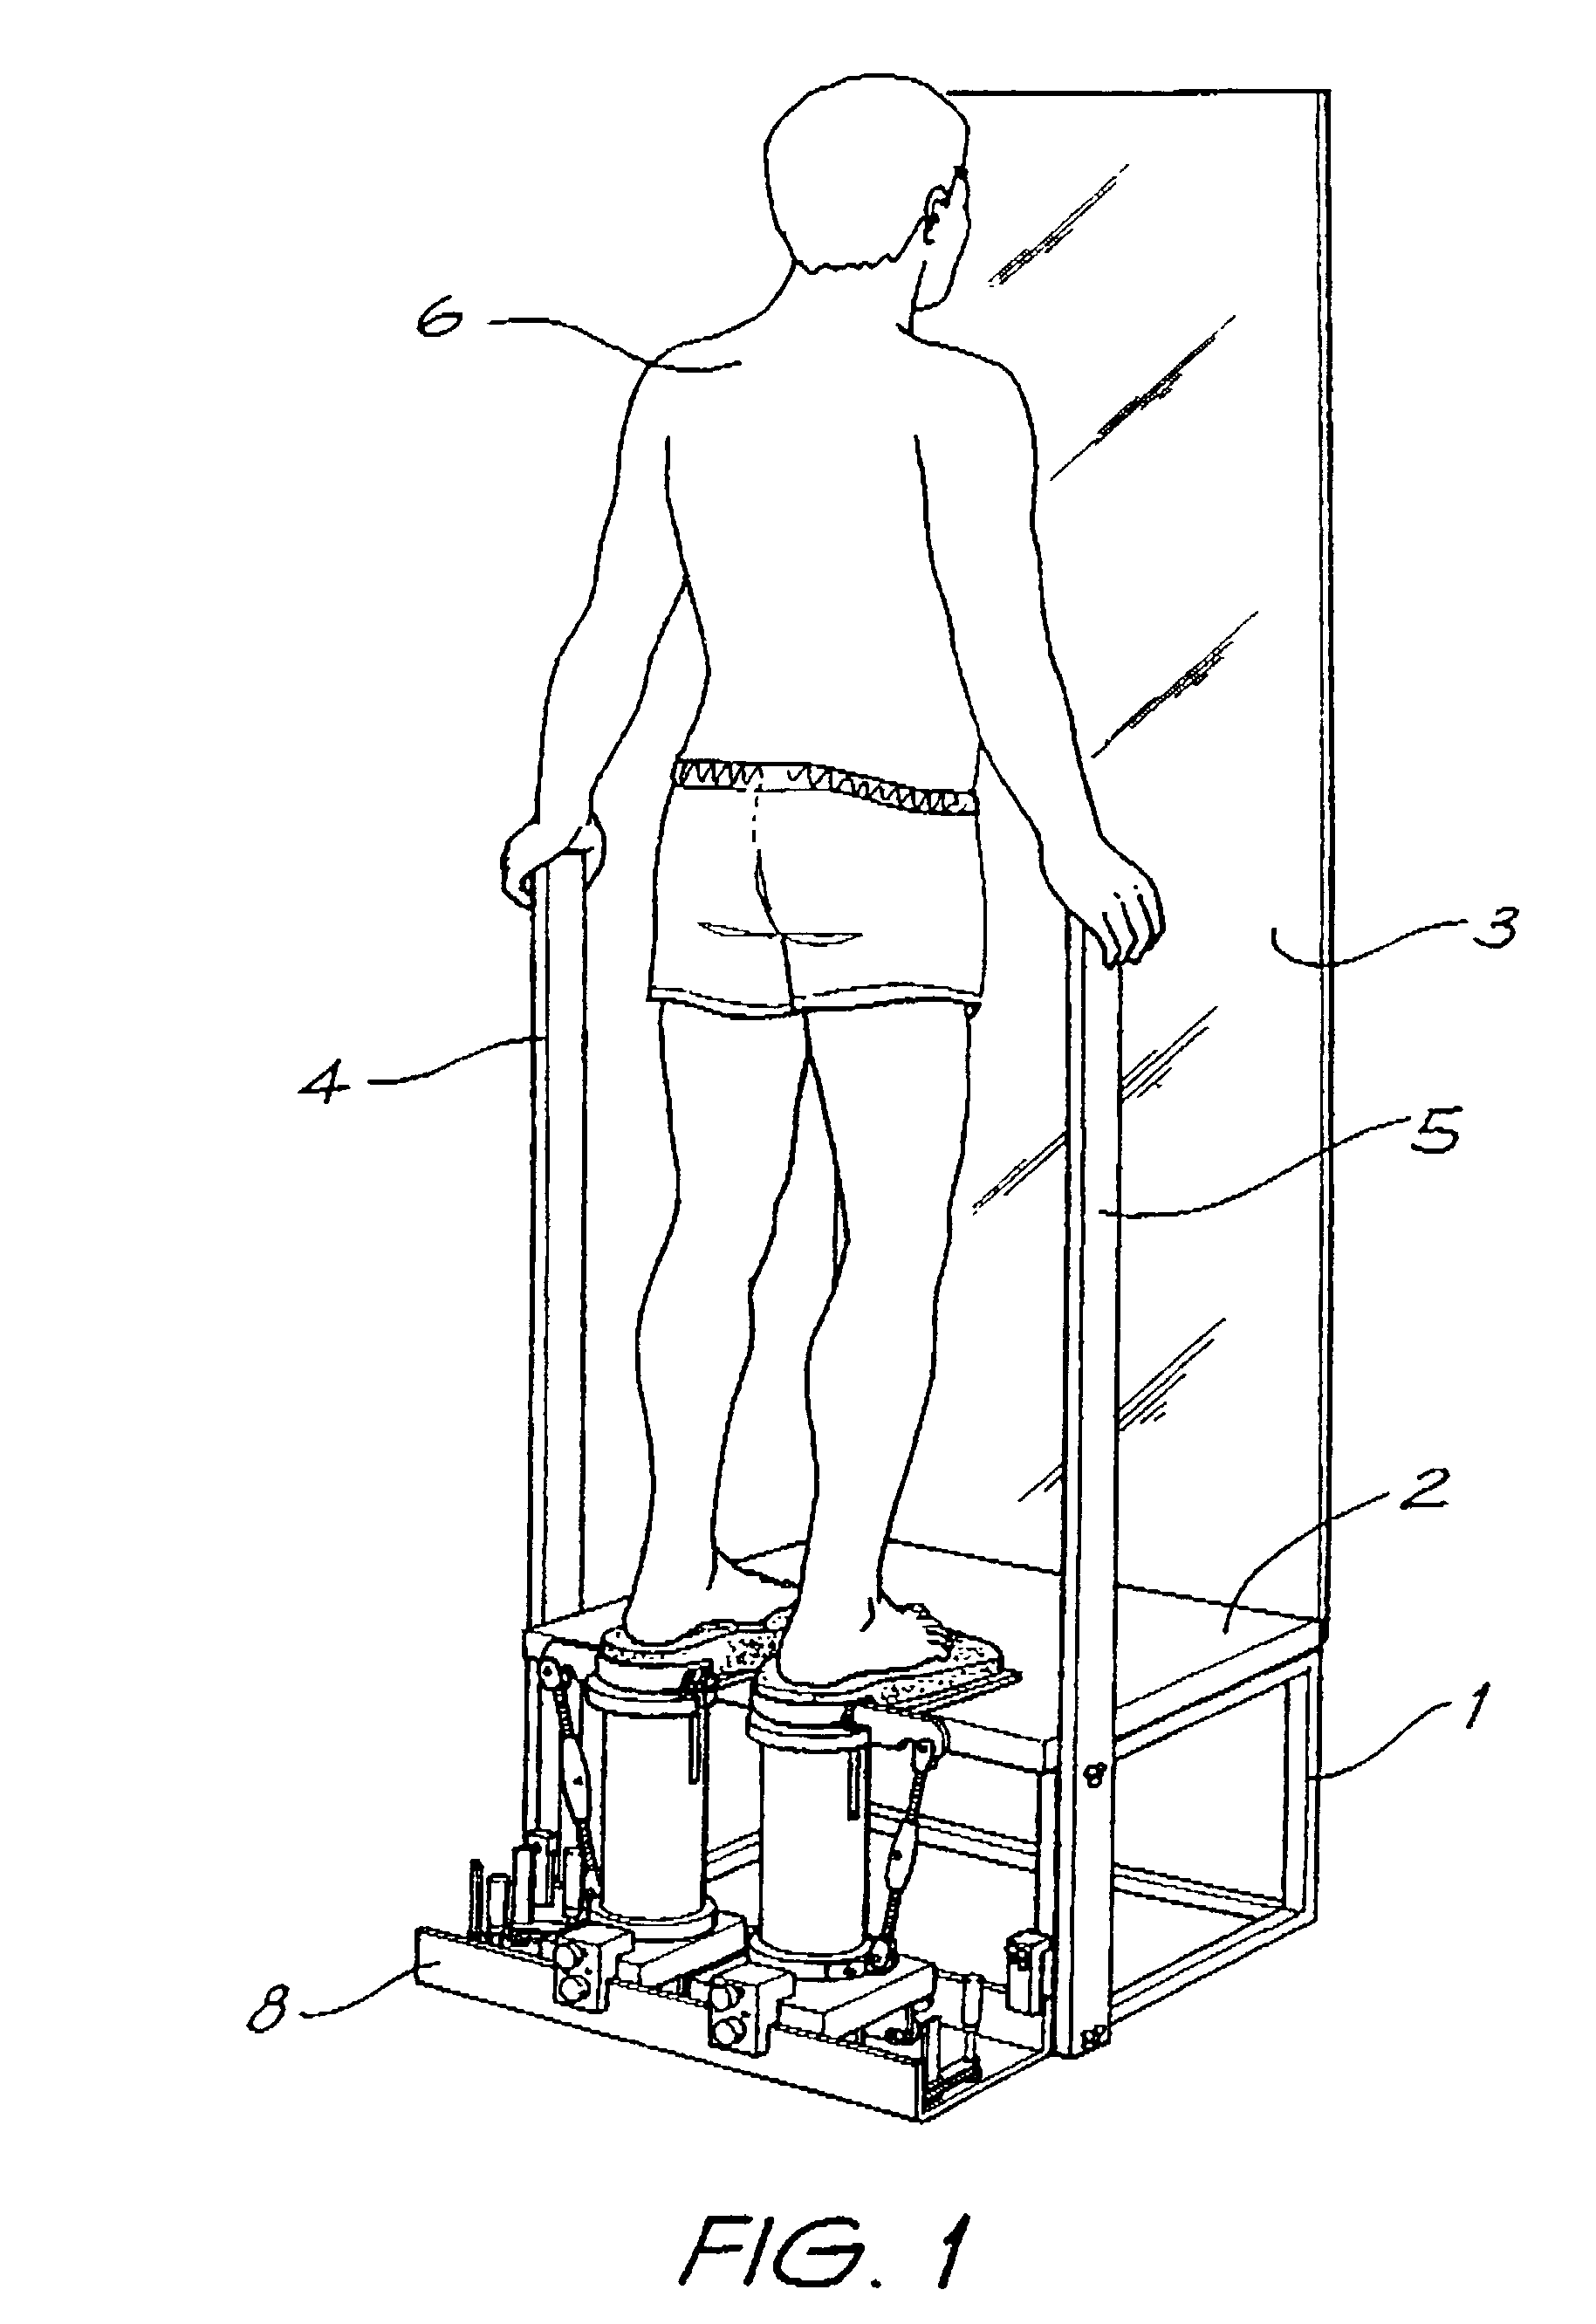 Apparatus and method for prescribing and manufacturing orthotic foot devices